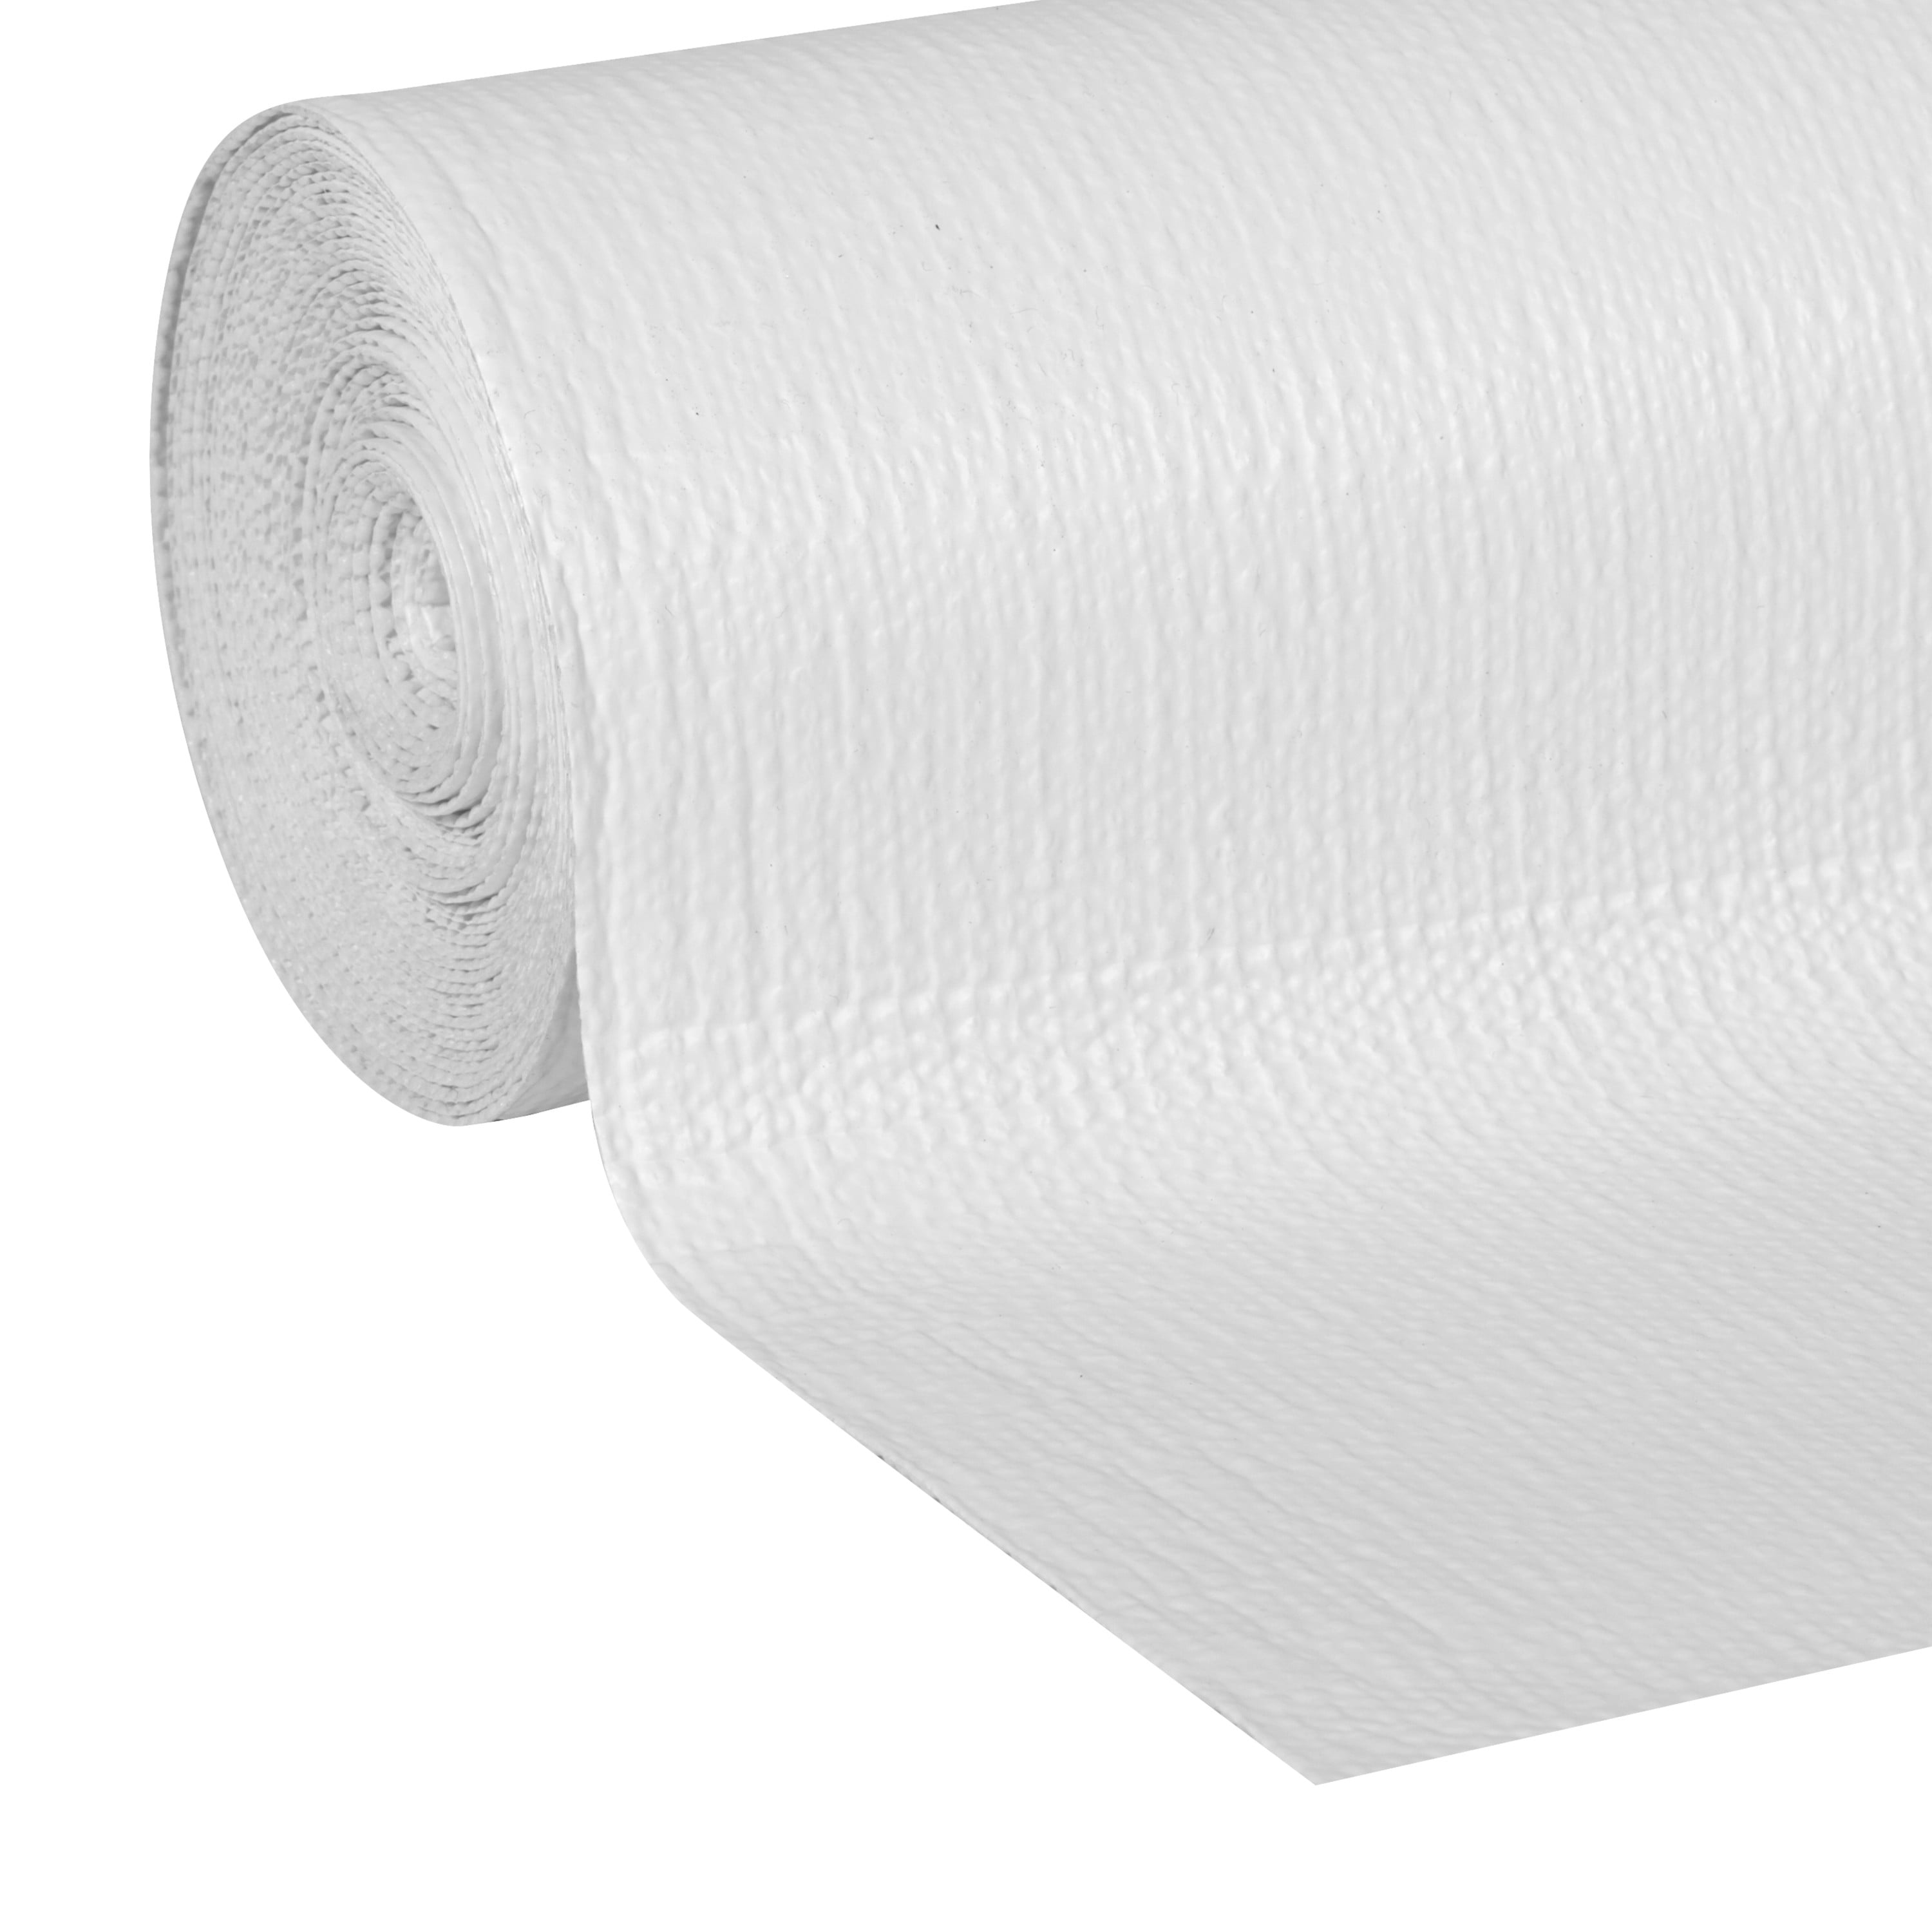 Duck Smooth Top Easy Non-Adhesive Shelf Liner 20-inch x 24 Feet White Fivе Расk 